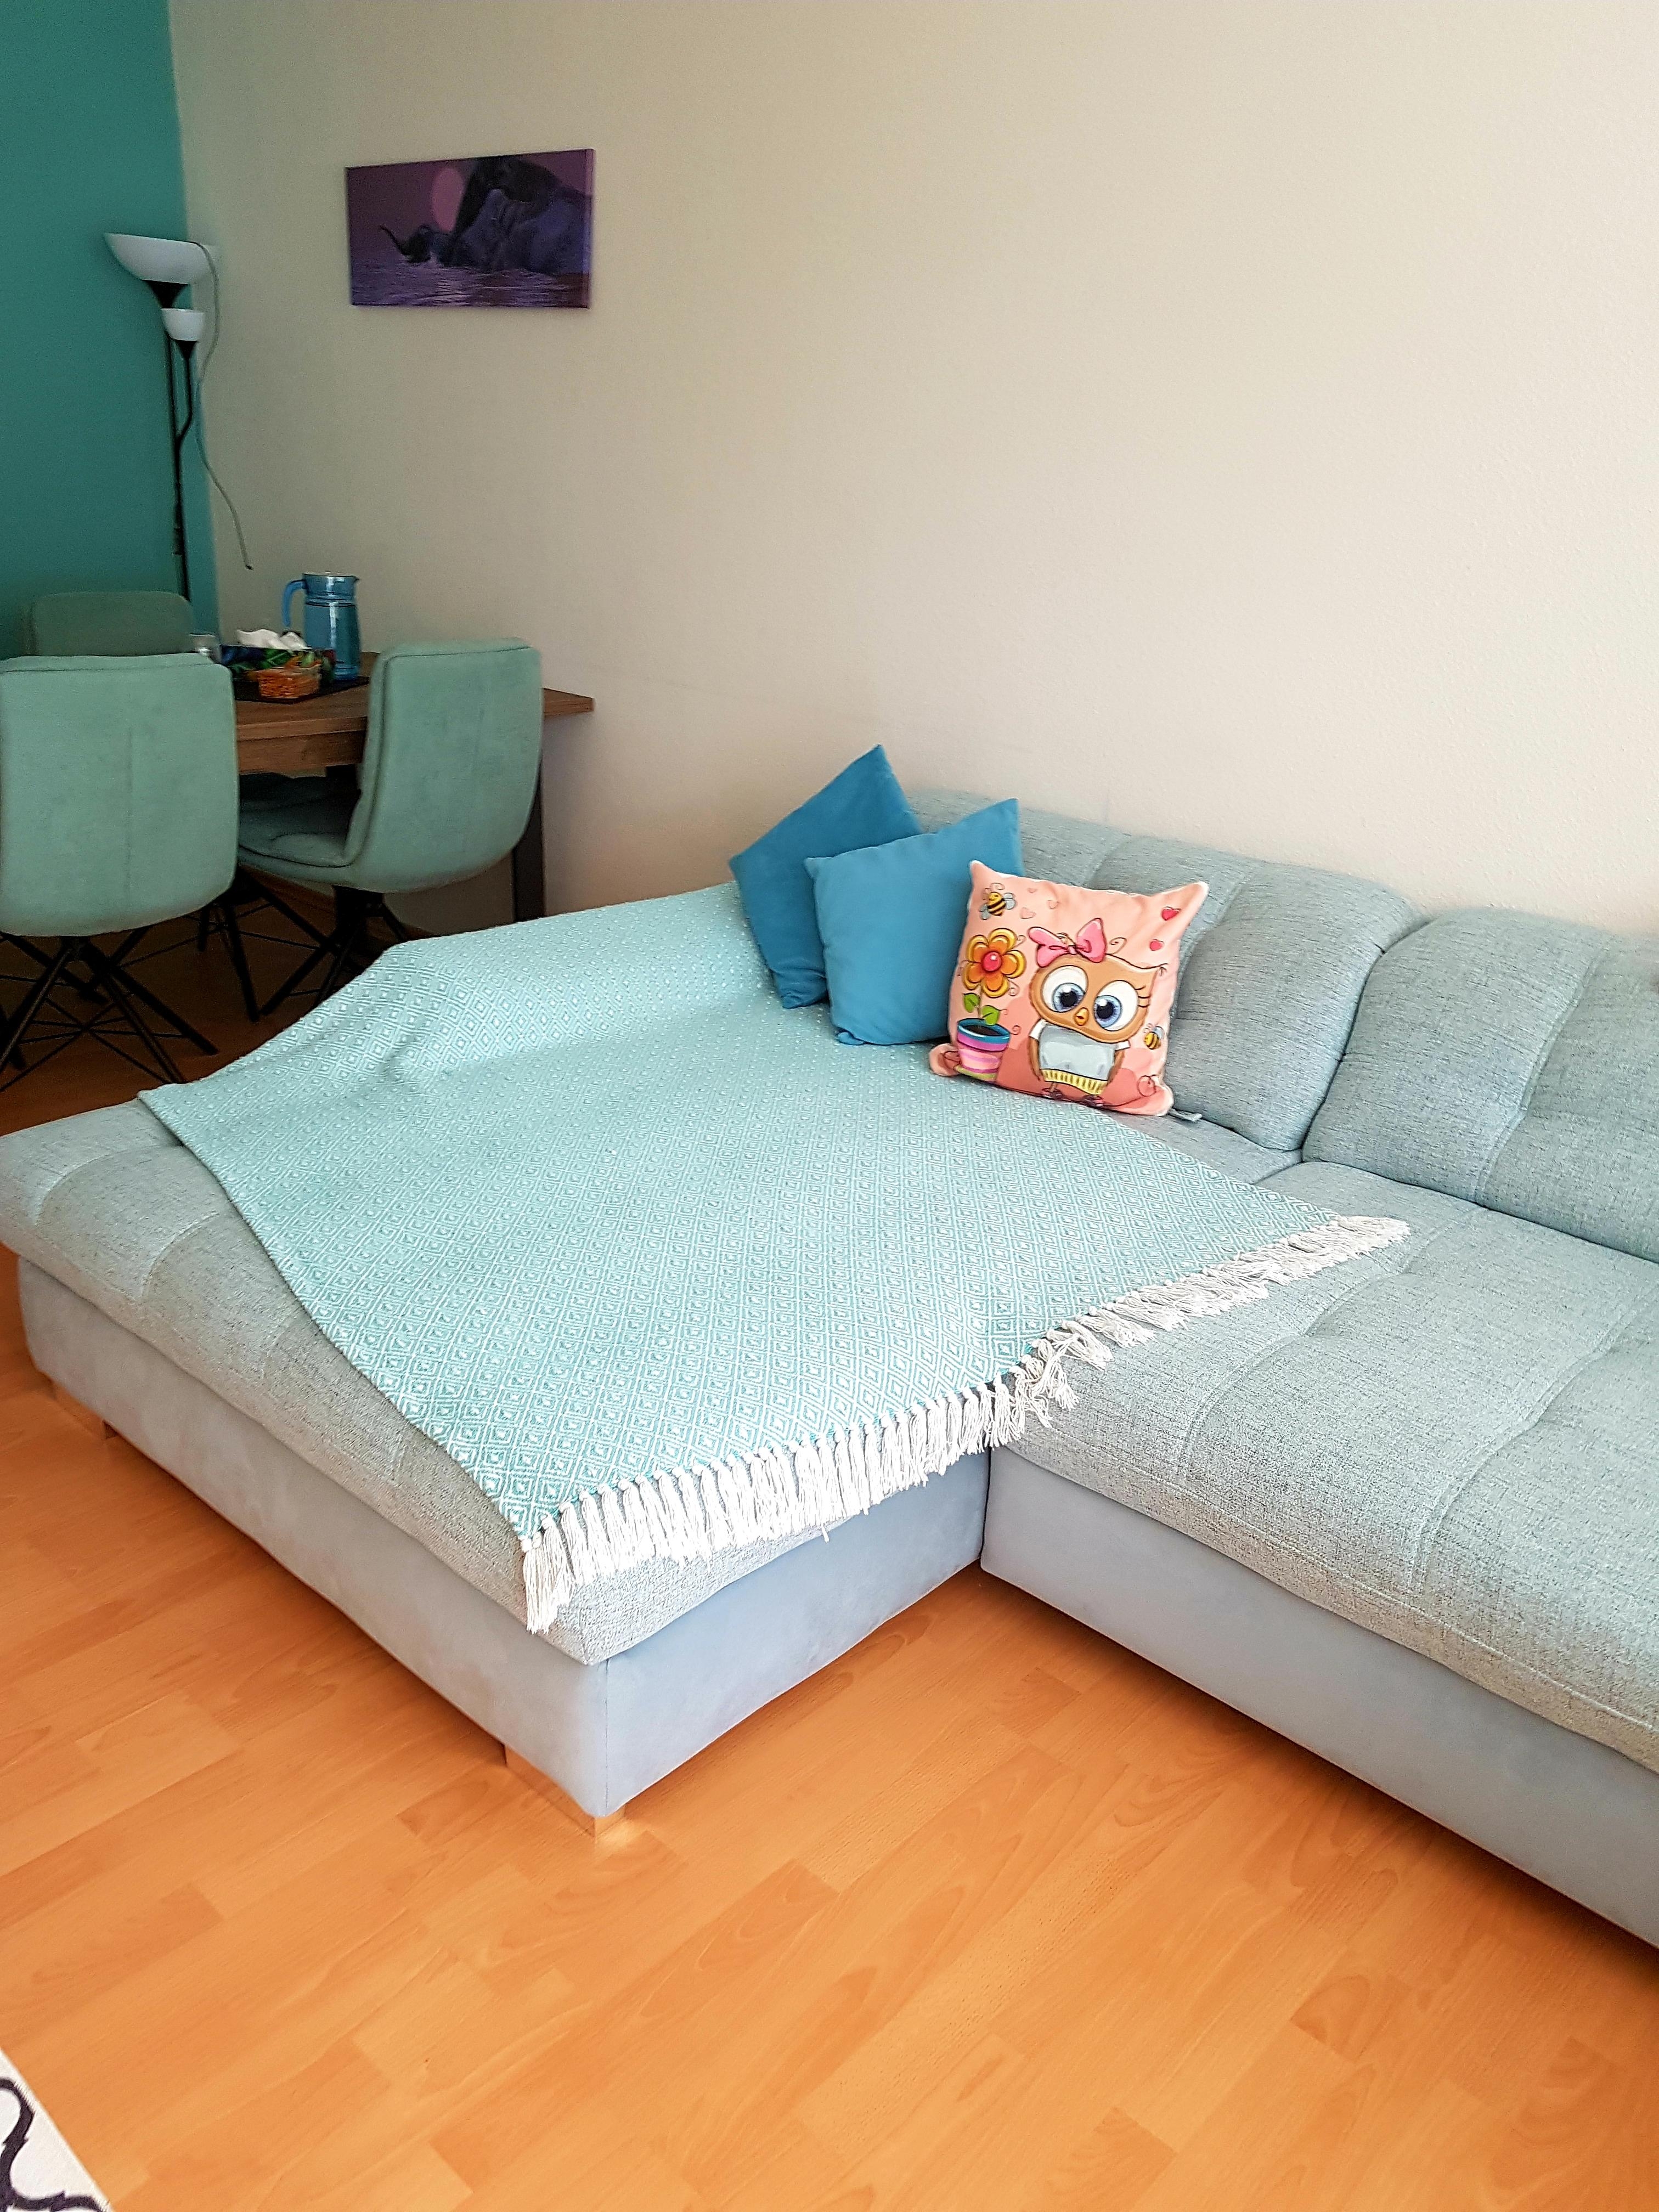 Mein Couch #green #blue #eule #pillow #lovehome #sweet 